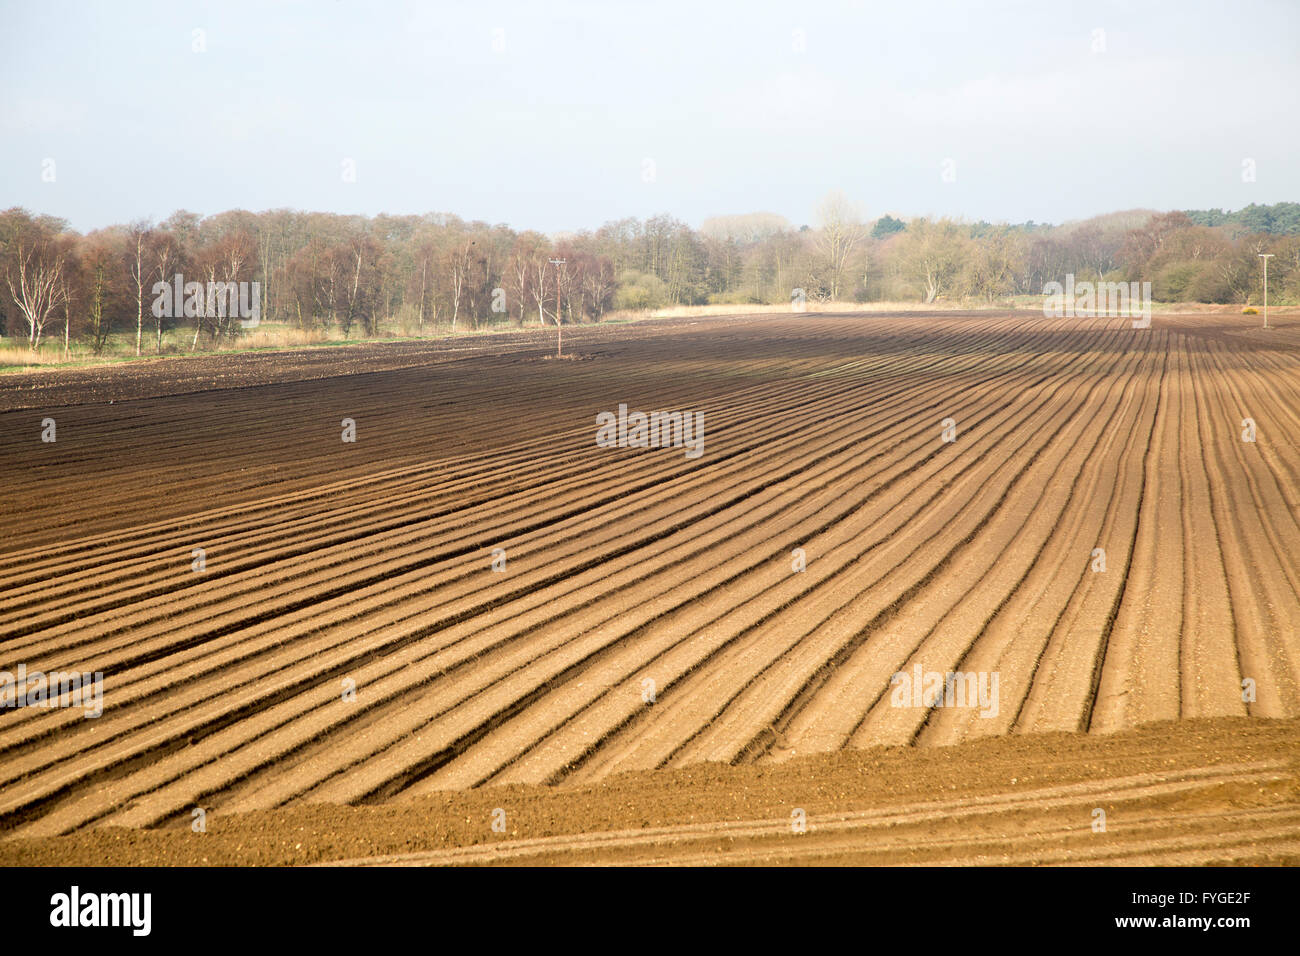 Rows made in sandy soil in field prepared for cultivation, Suffolk Sandlings landscape, Butley, Suffolk, England, UK Stock Photo